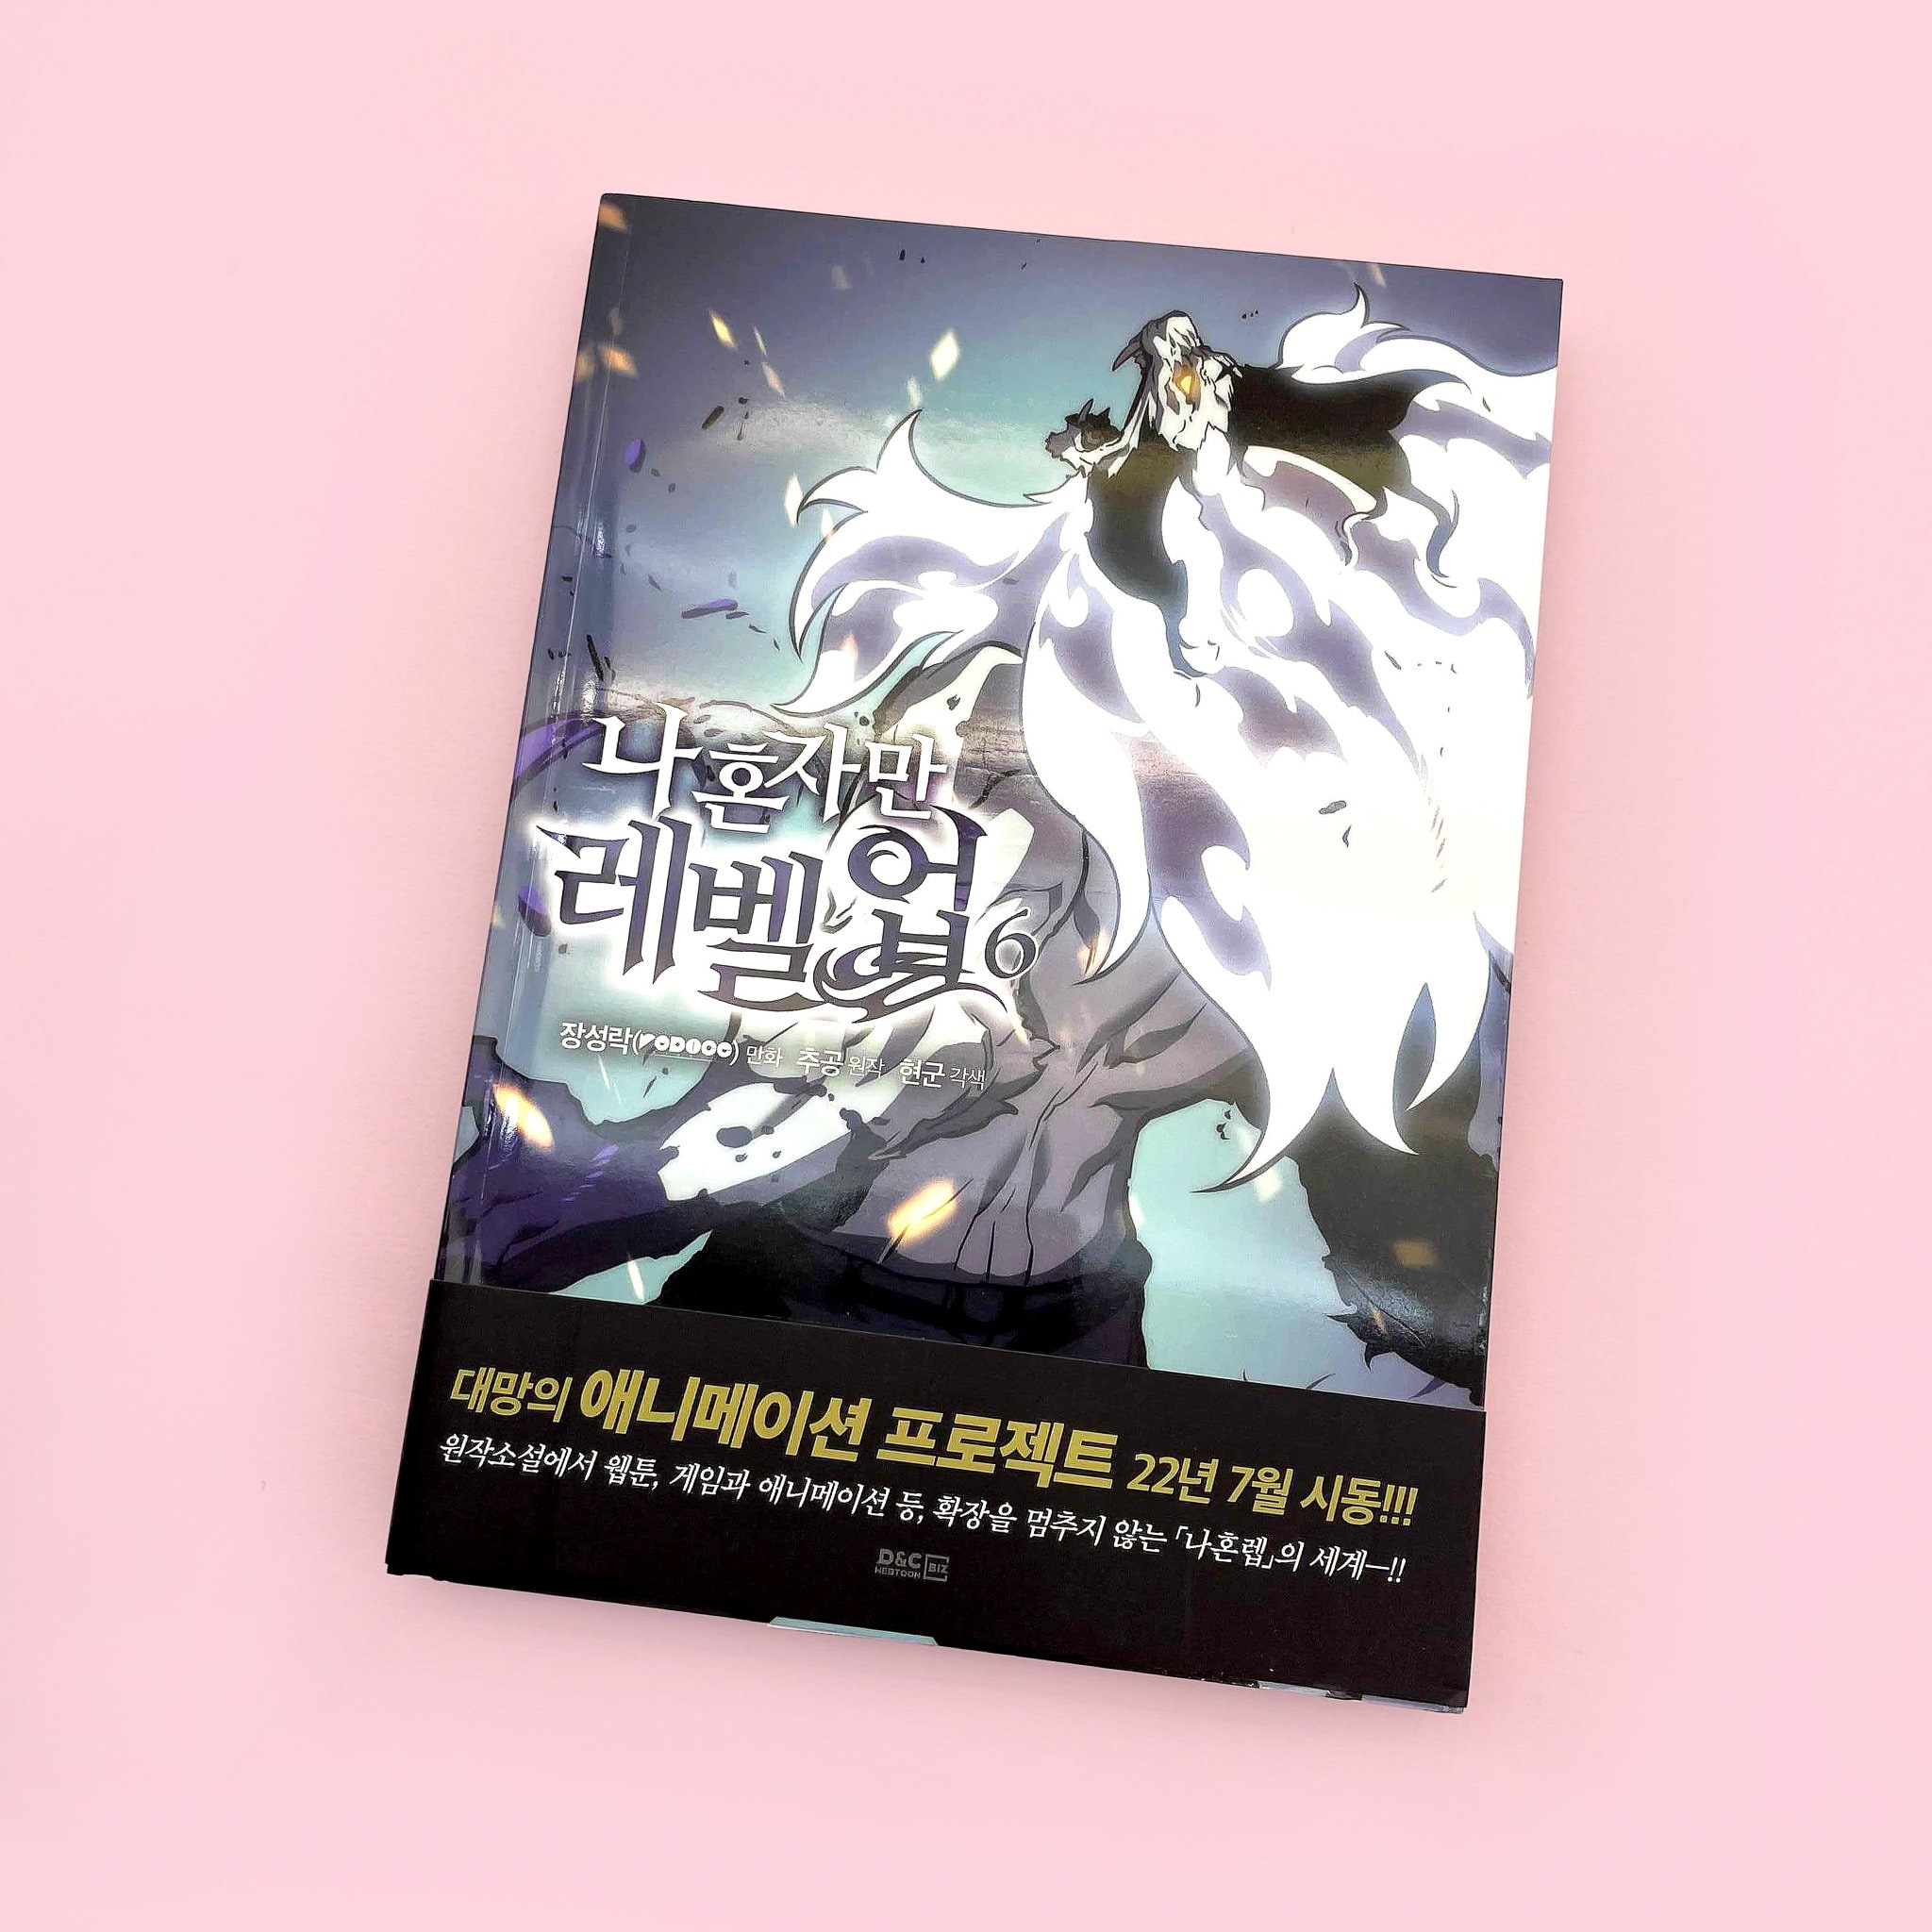 Solo Leveling, Tome 12 (Solo Leveling #12) by Chugong